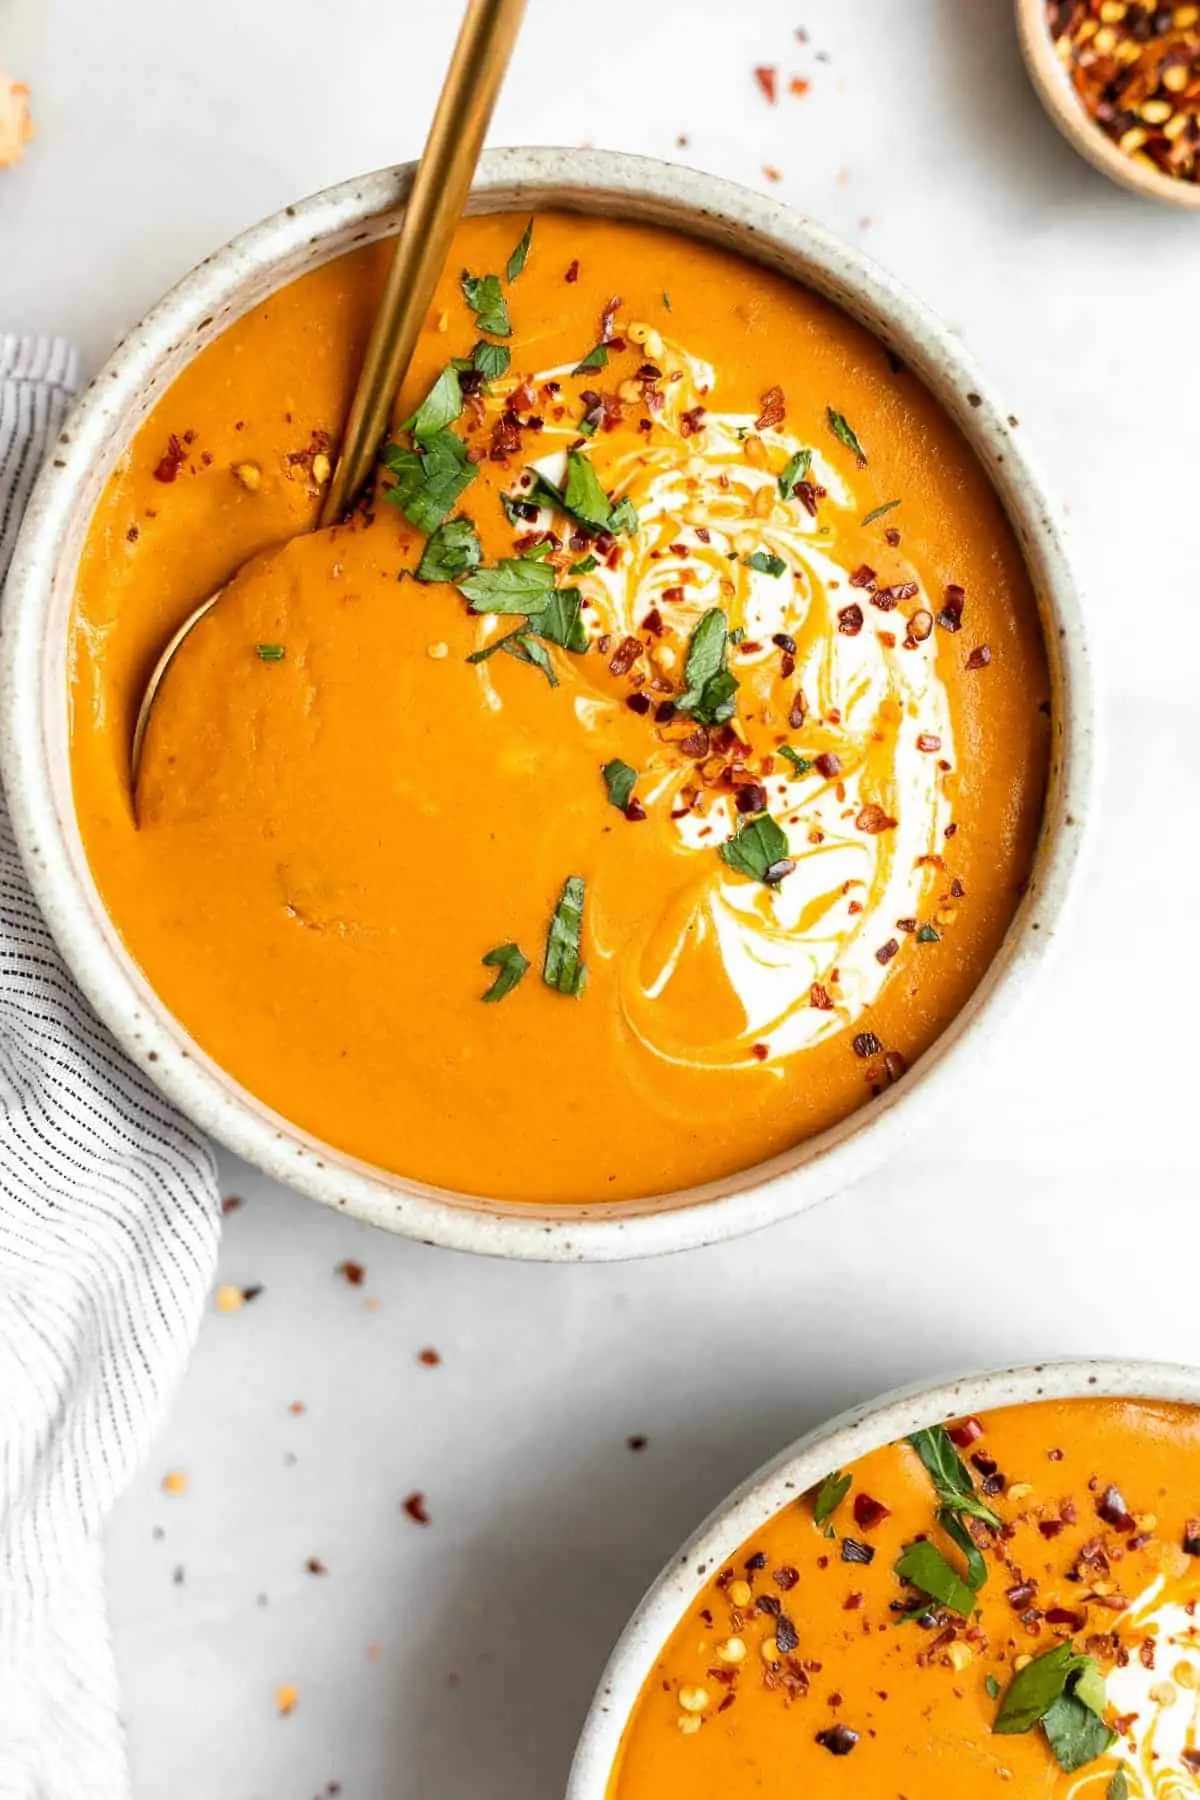 Red lentil and carrot soup with chopped parsley in a white bowl.